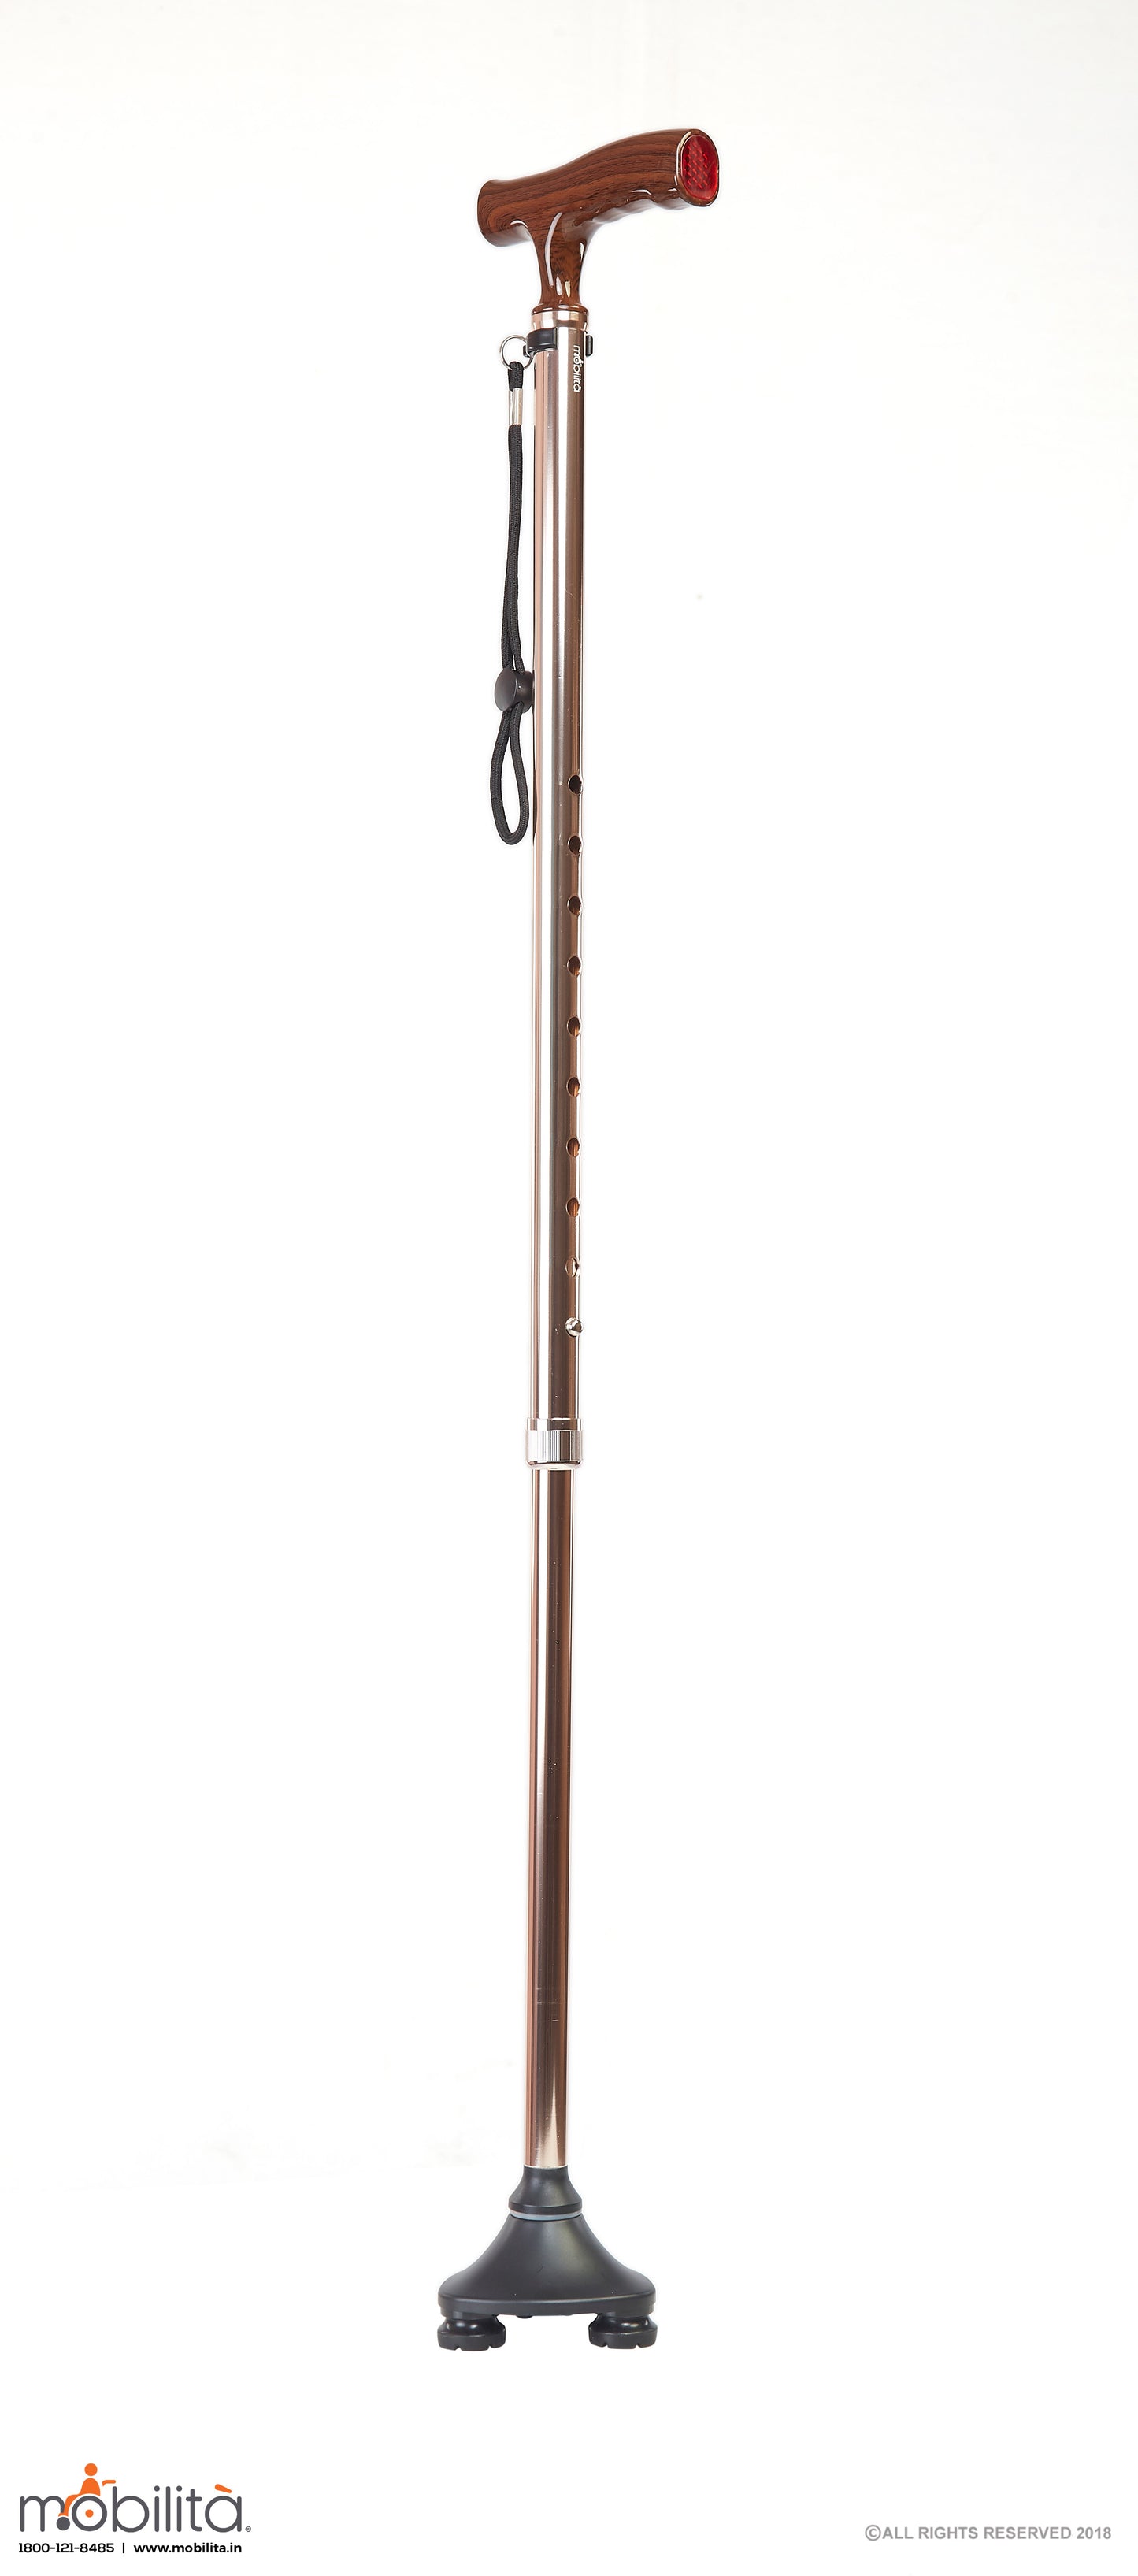 M 707 - Walking Cane - Triangle Foot - Straight Shank - Champagne Gold